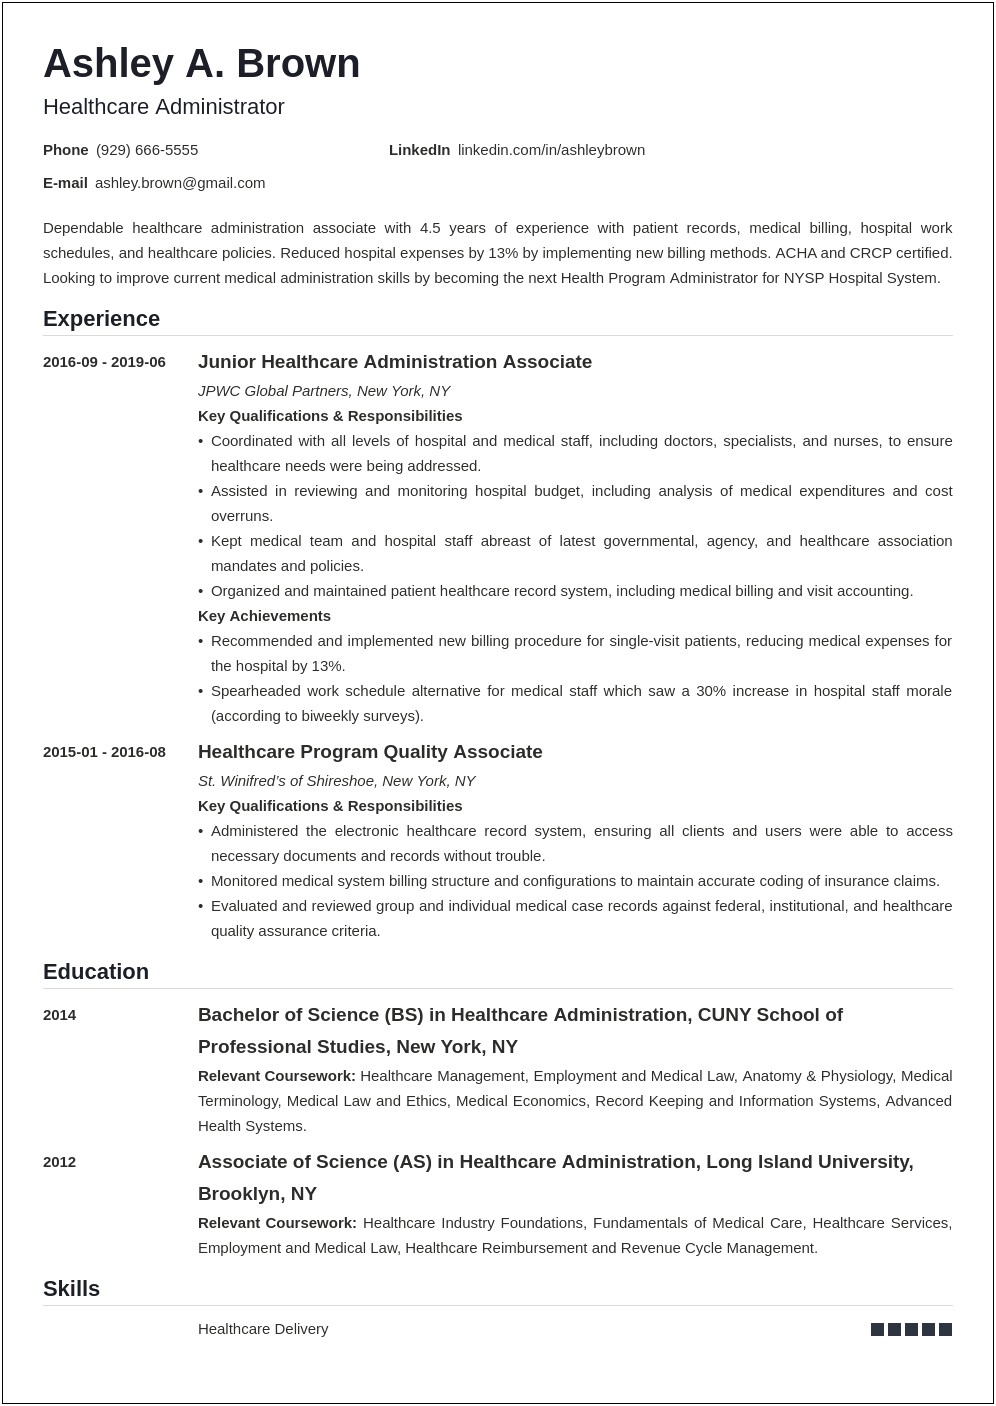 Does Resume Require Objective And Summary